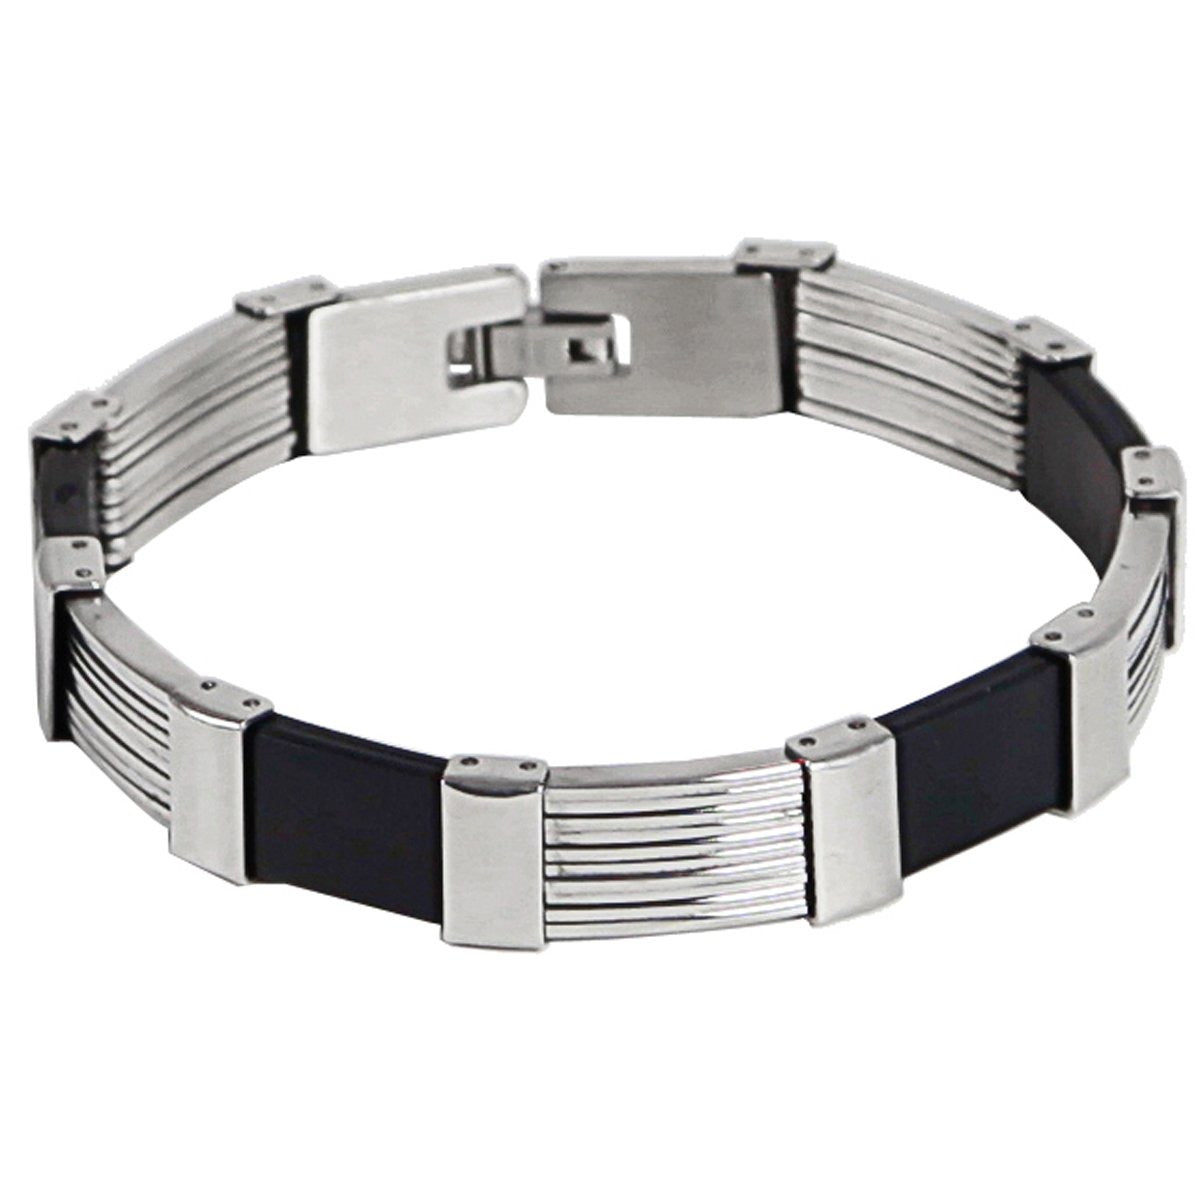 M|M Stainless Bracelet Assortment - Jewelry - Mad Man by Mad Style Wholesale